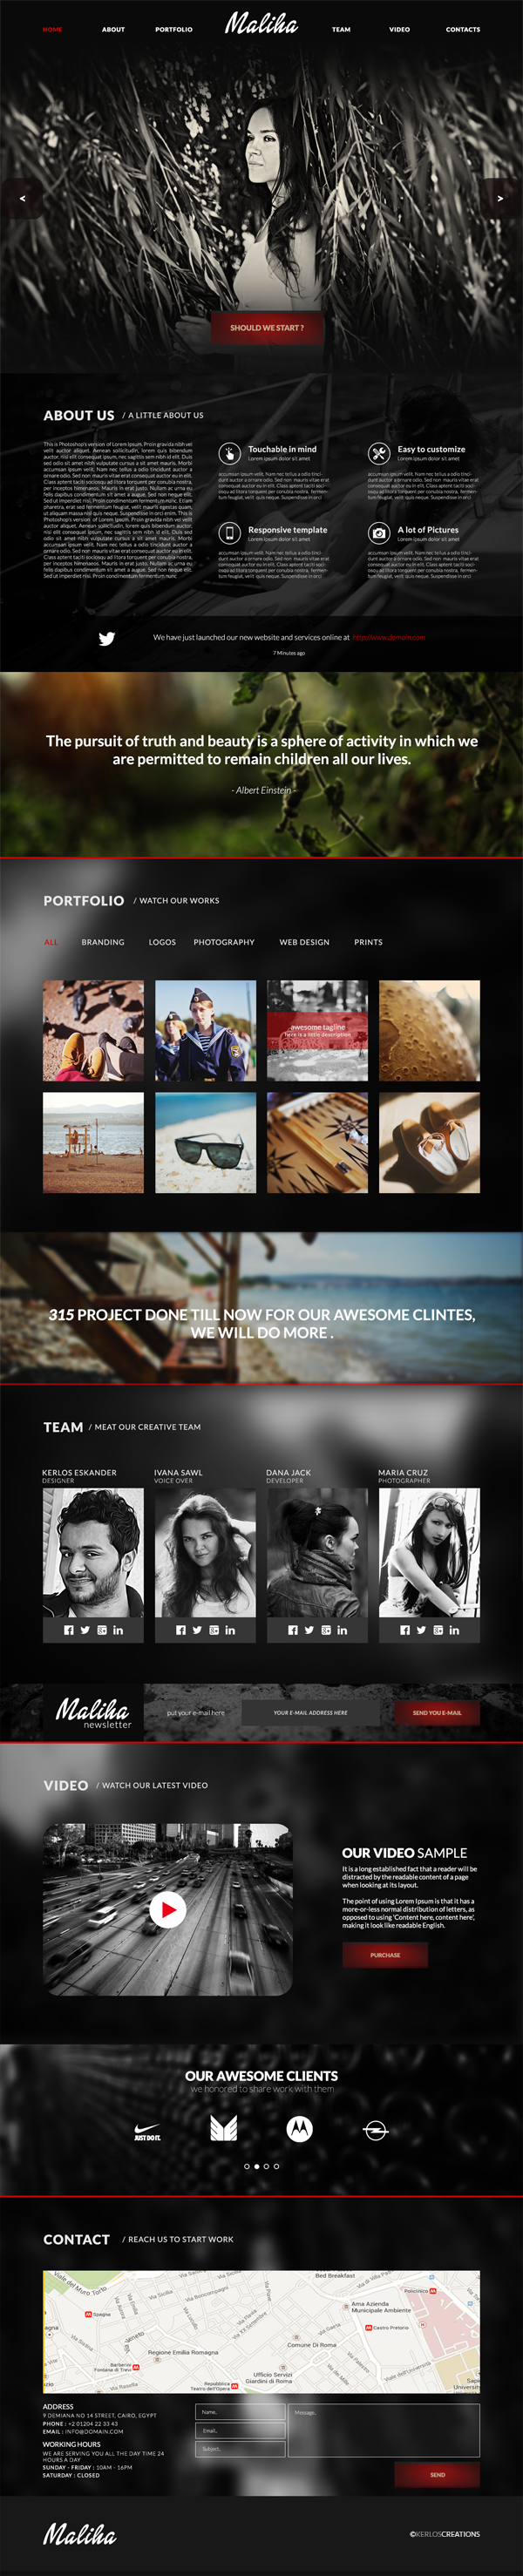 psd template creative design One Page photoshop Web site